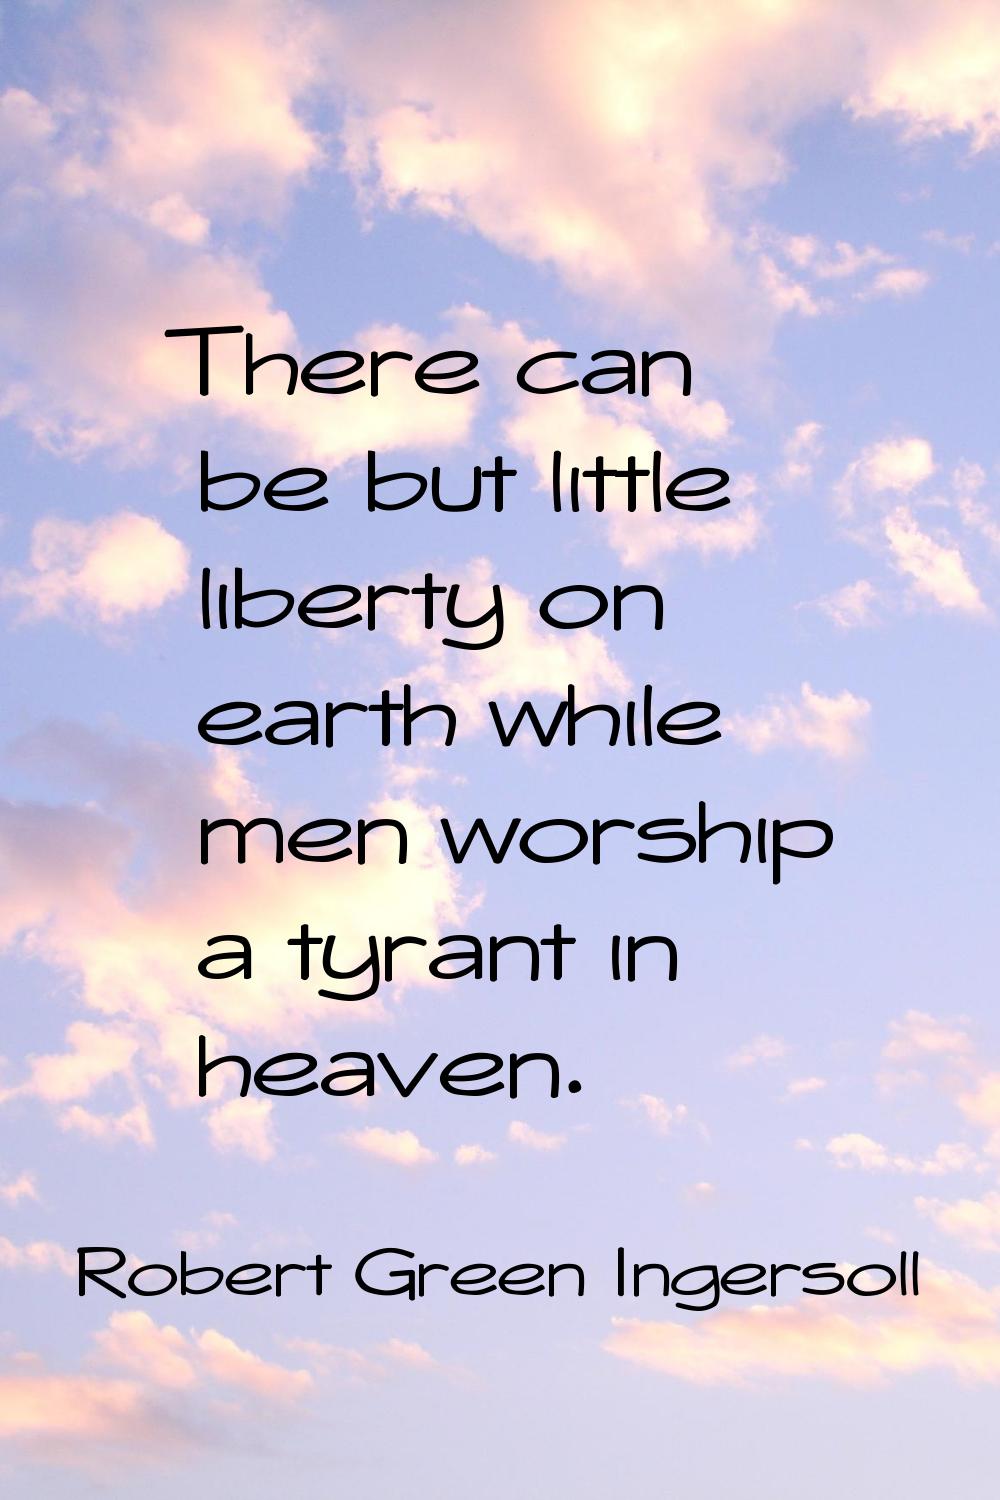 There can be but little liberty on earth while men worship a tyrant in heaven.